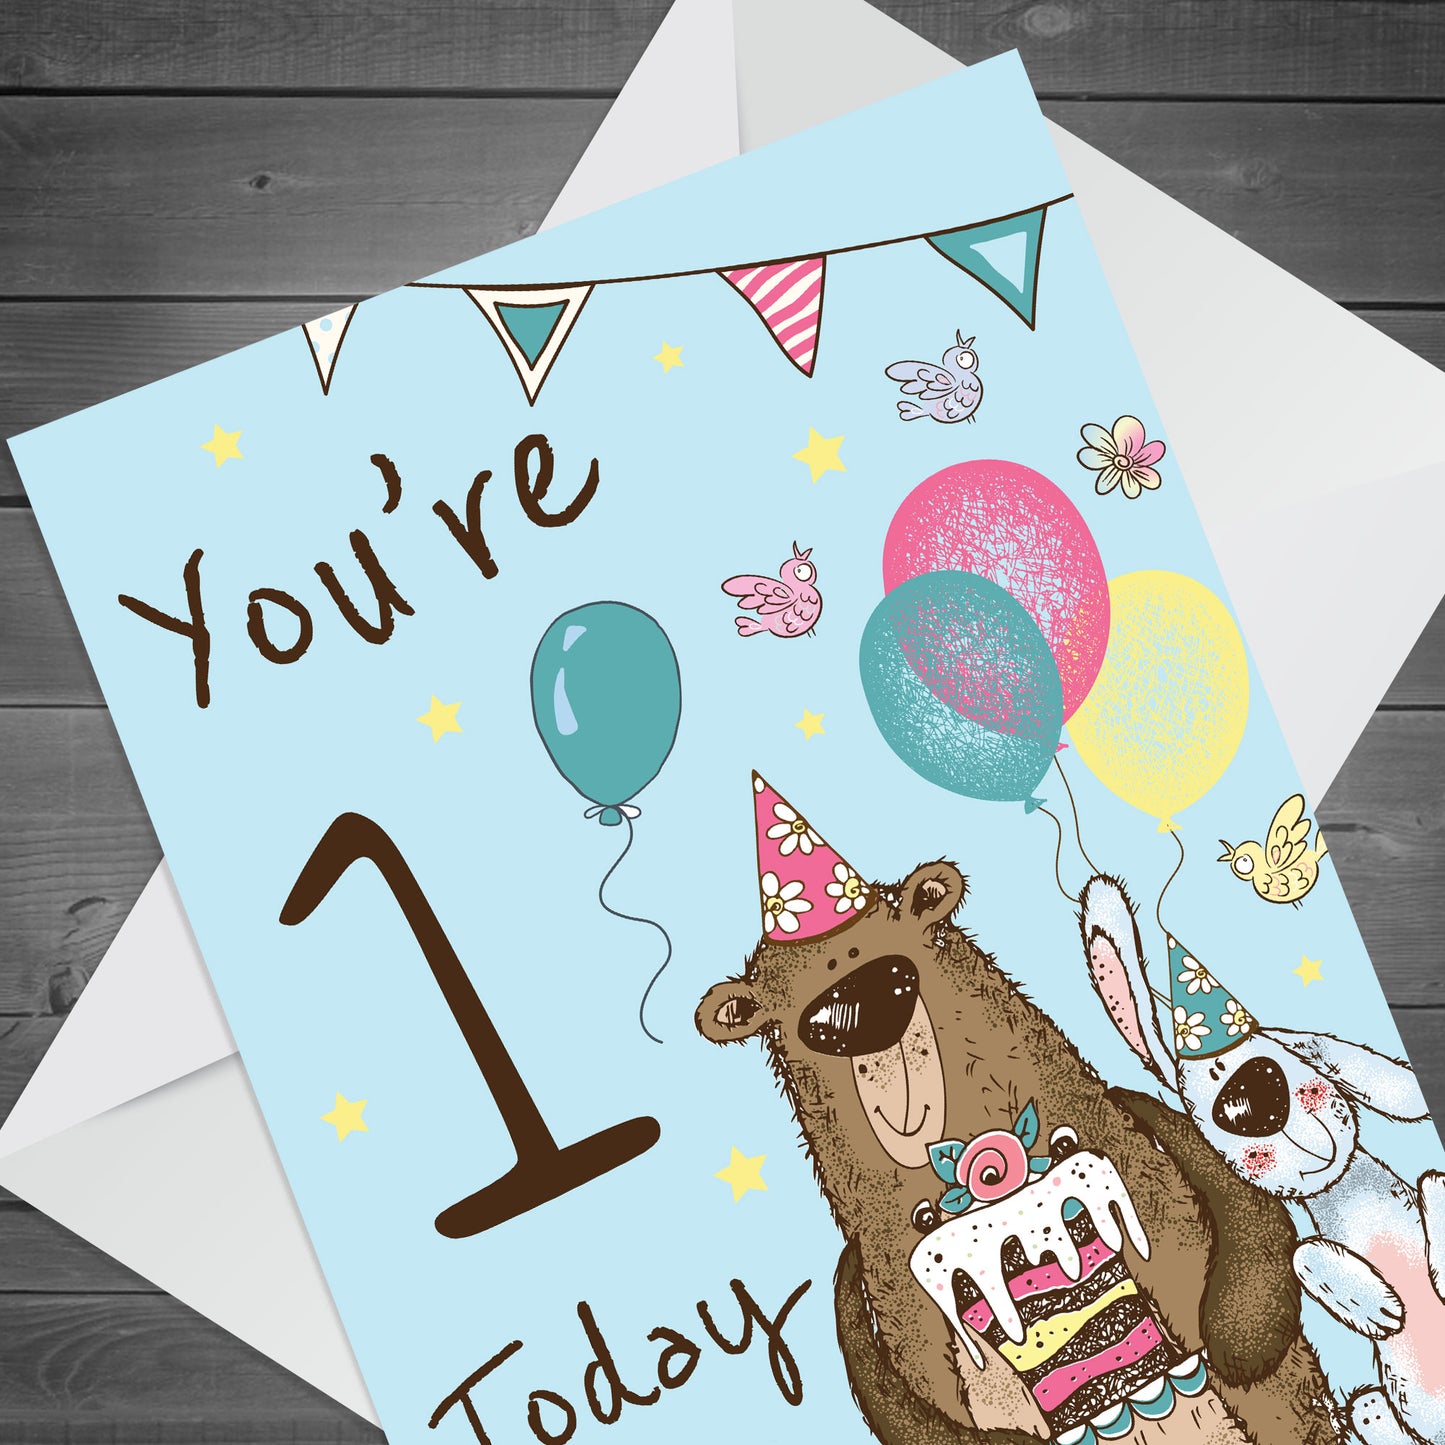 Youre 1 Today Birthday Card First Birthday Card For Grandson Son